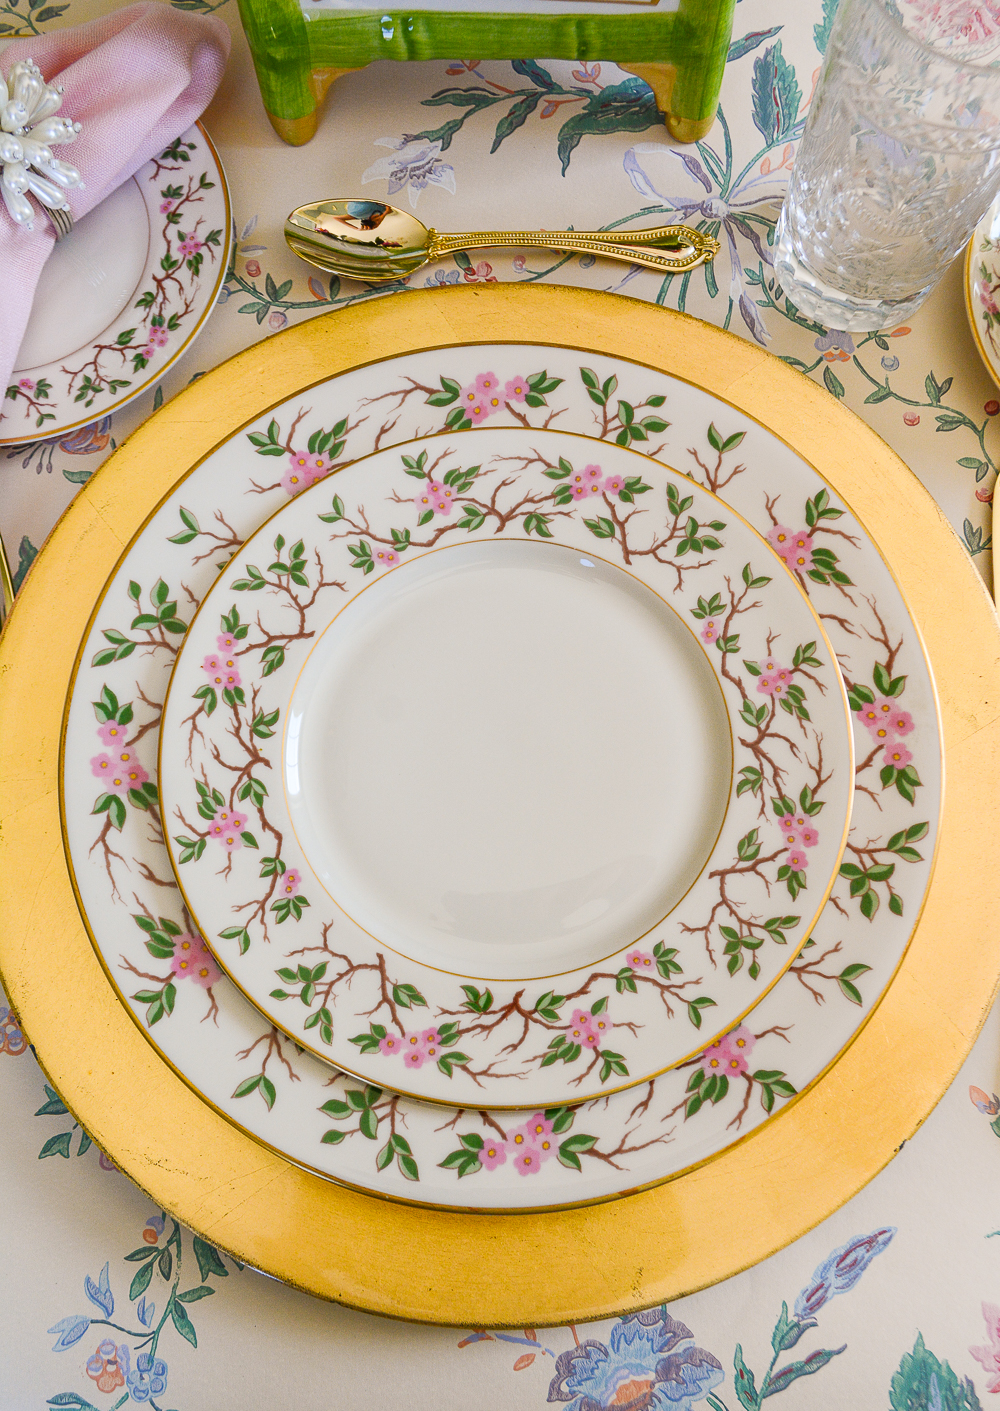 Franciscan's woodside china with pink florals and gold rim